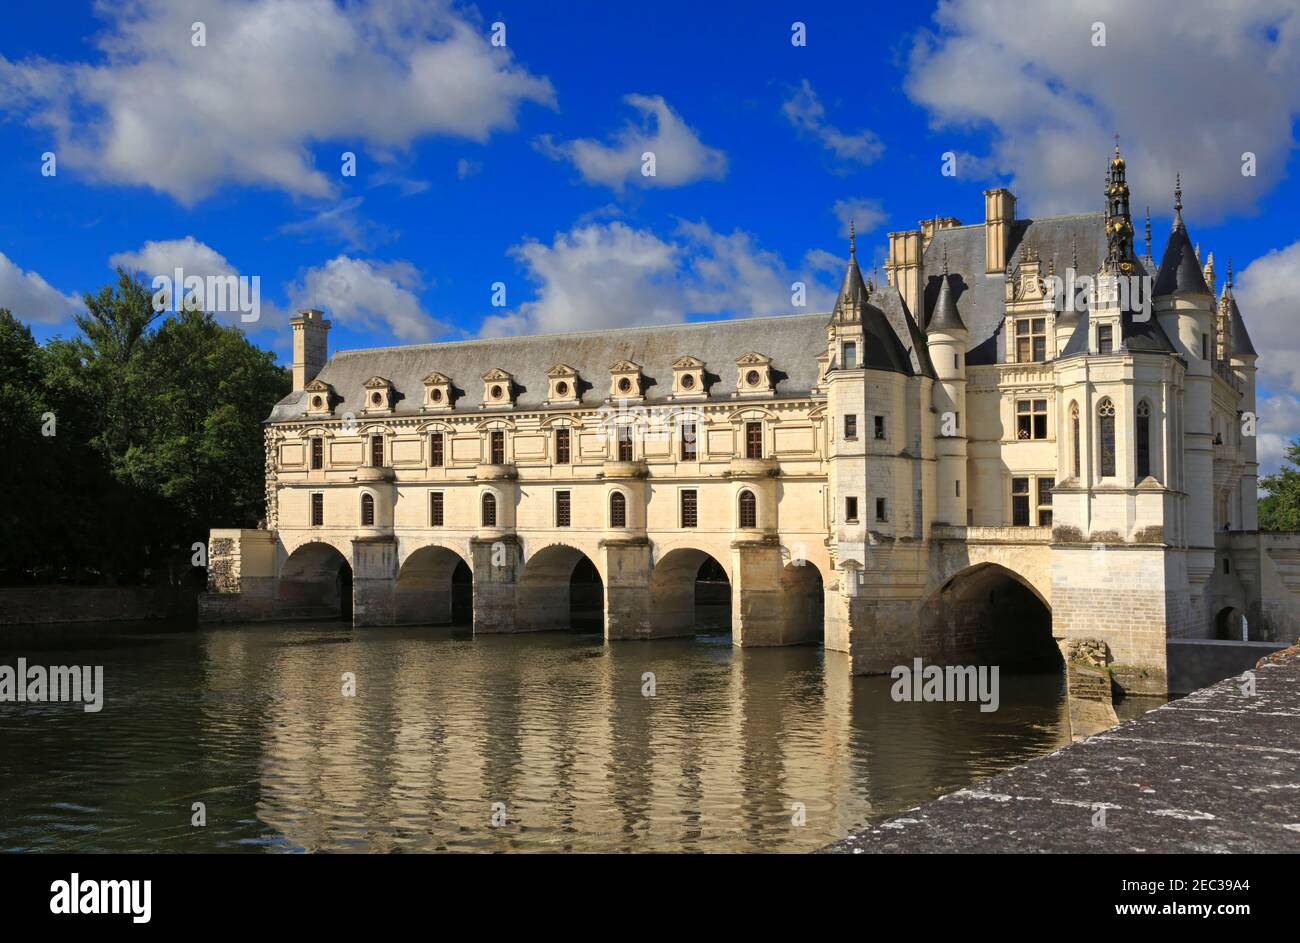 Chateau Chenonceau, Loire Valley, France. Sixteenth century Renaissance chateau on the River Cher. Stock Photo